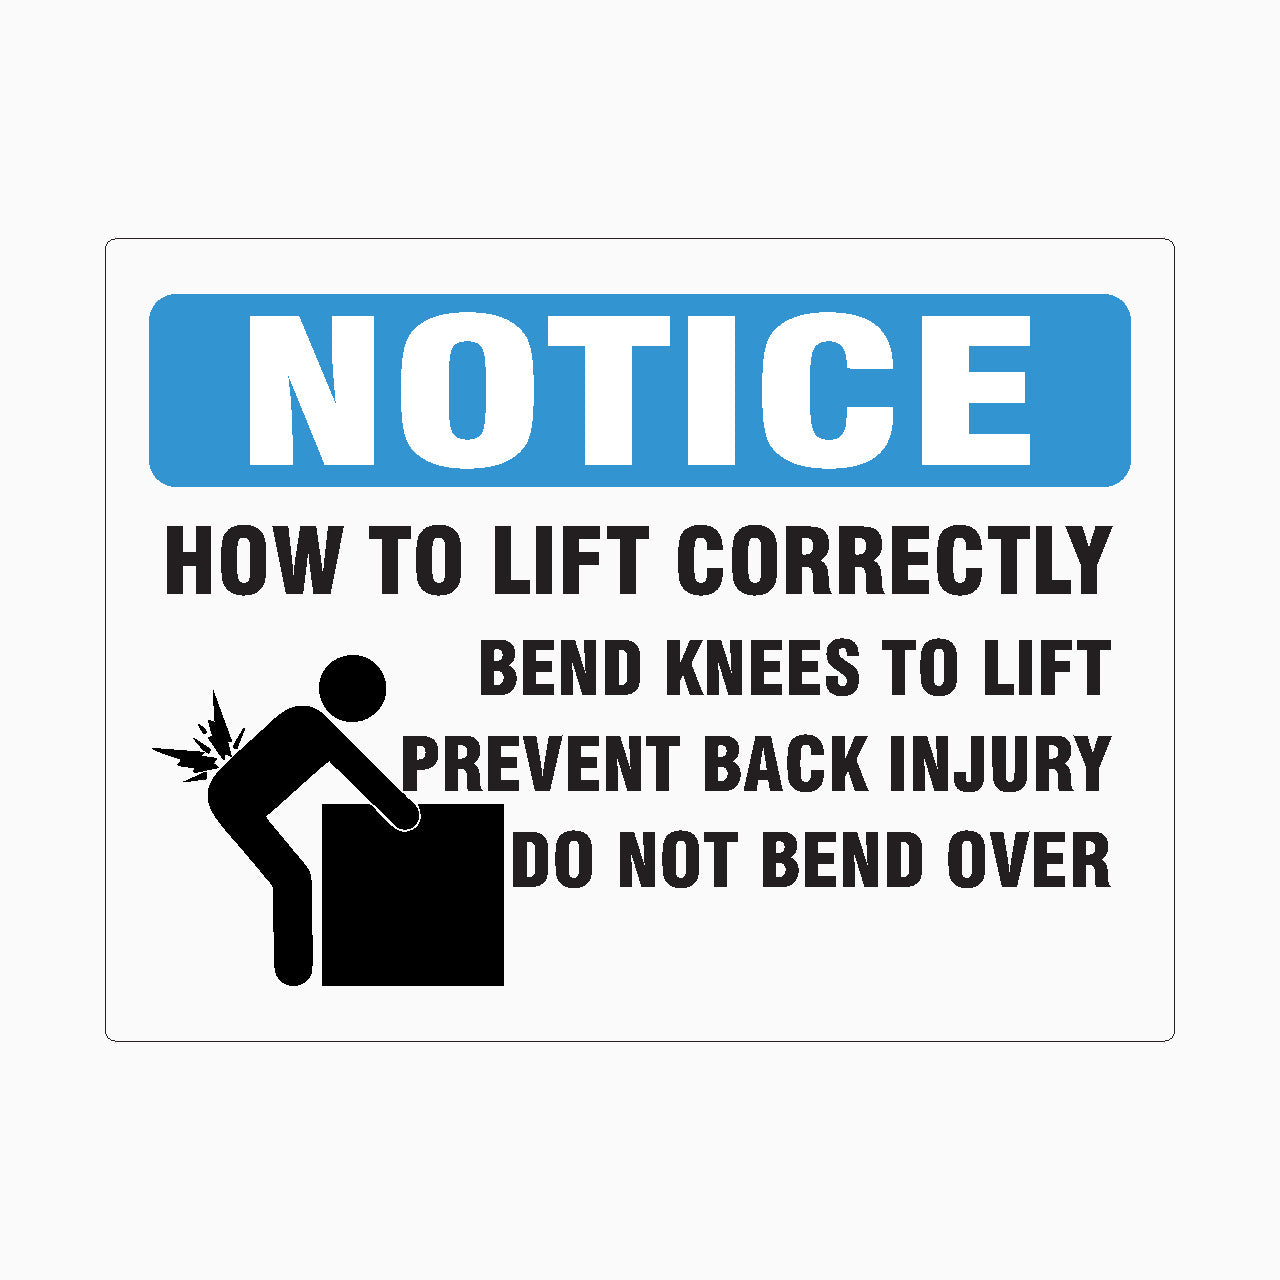 NOTICE SIGN - HOW TO LIFT CORRECTLY - BEND KNEES TO LIFT PREVENT BACK INJURY DO NOT BEND OVER SIGN